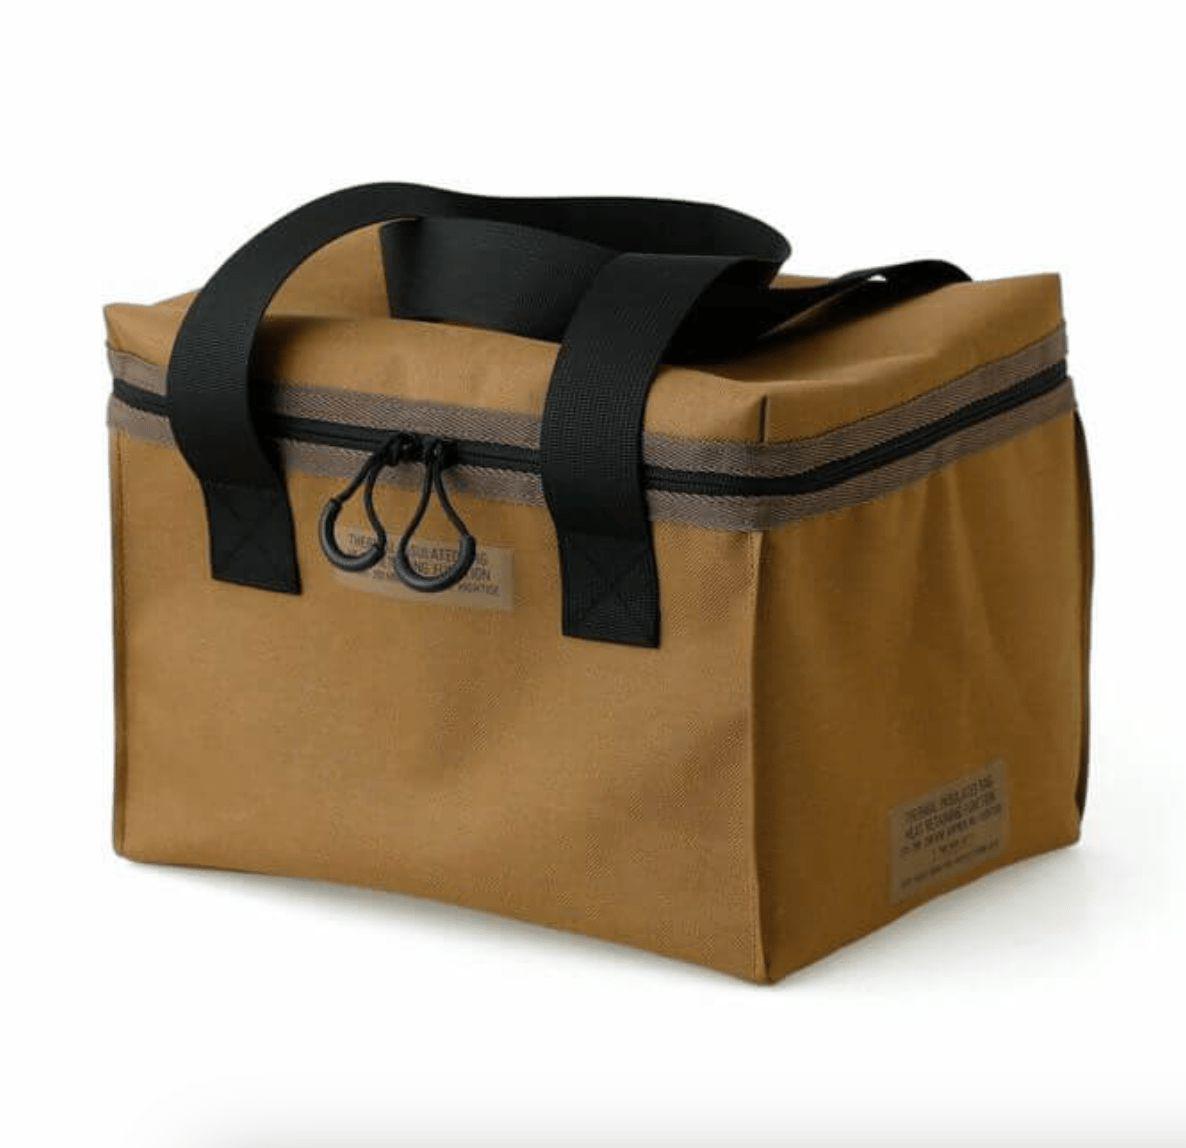 A Cooler Cargo Bag - M- Brown lunch bag with black handles by PENCO.